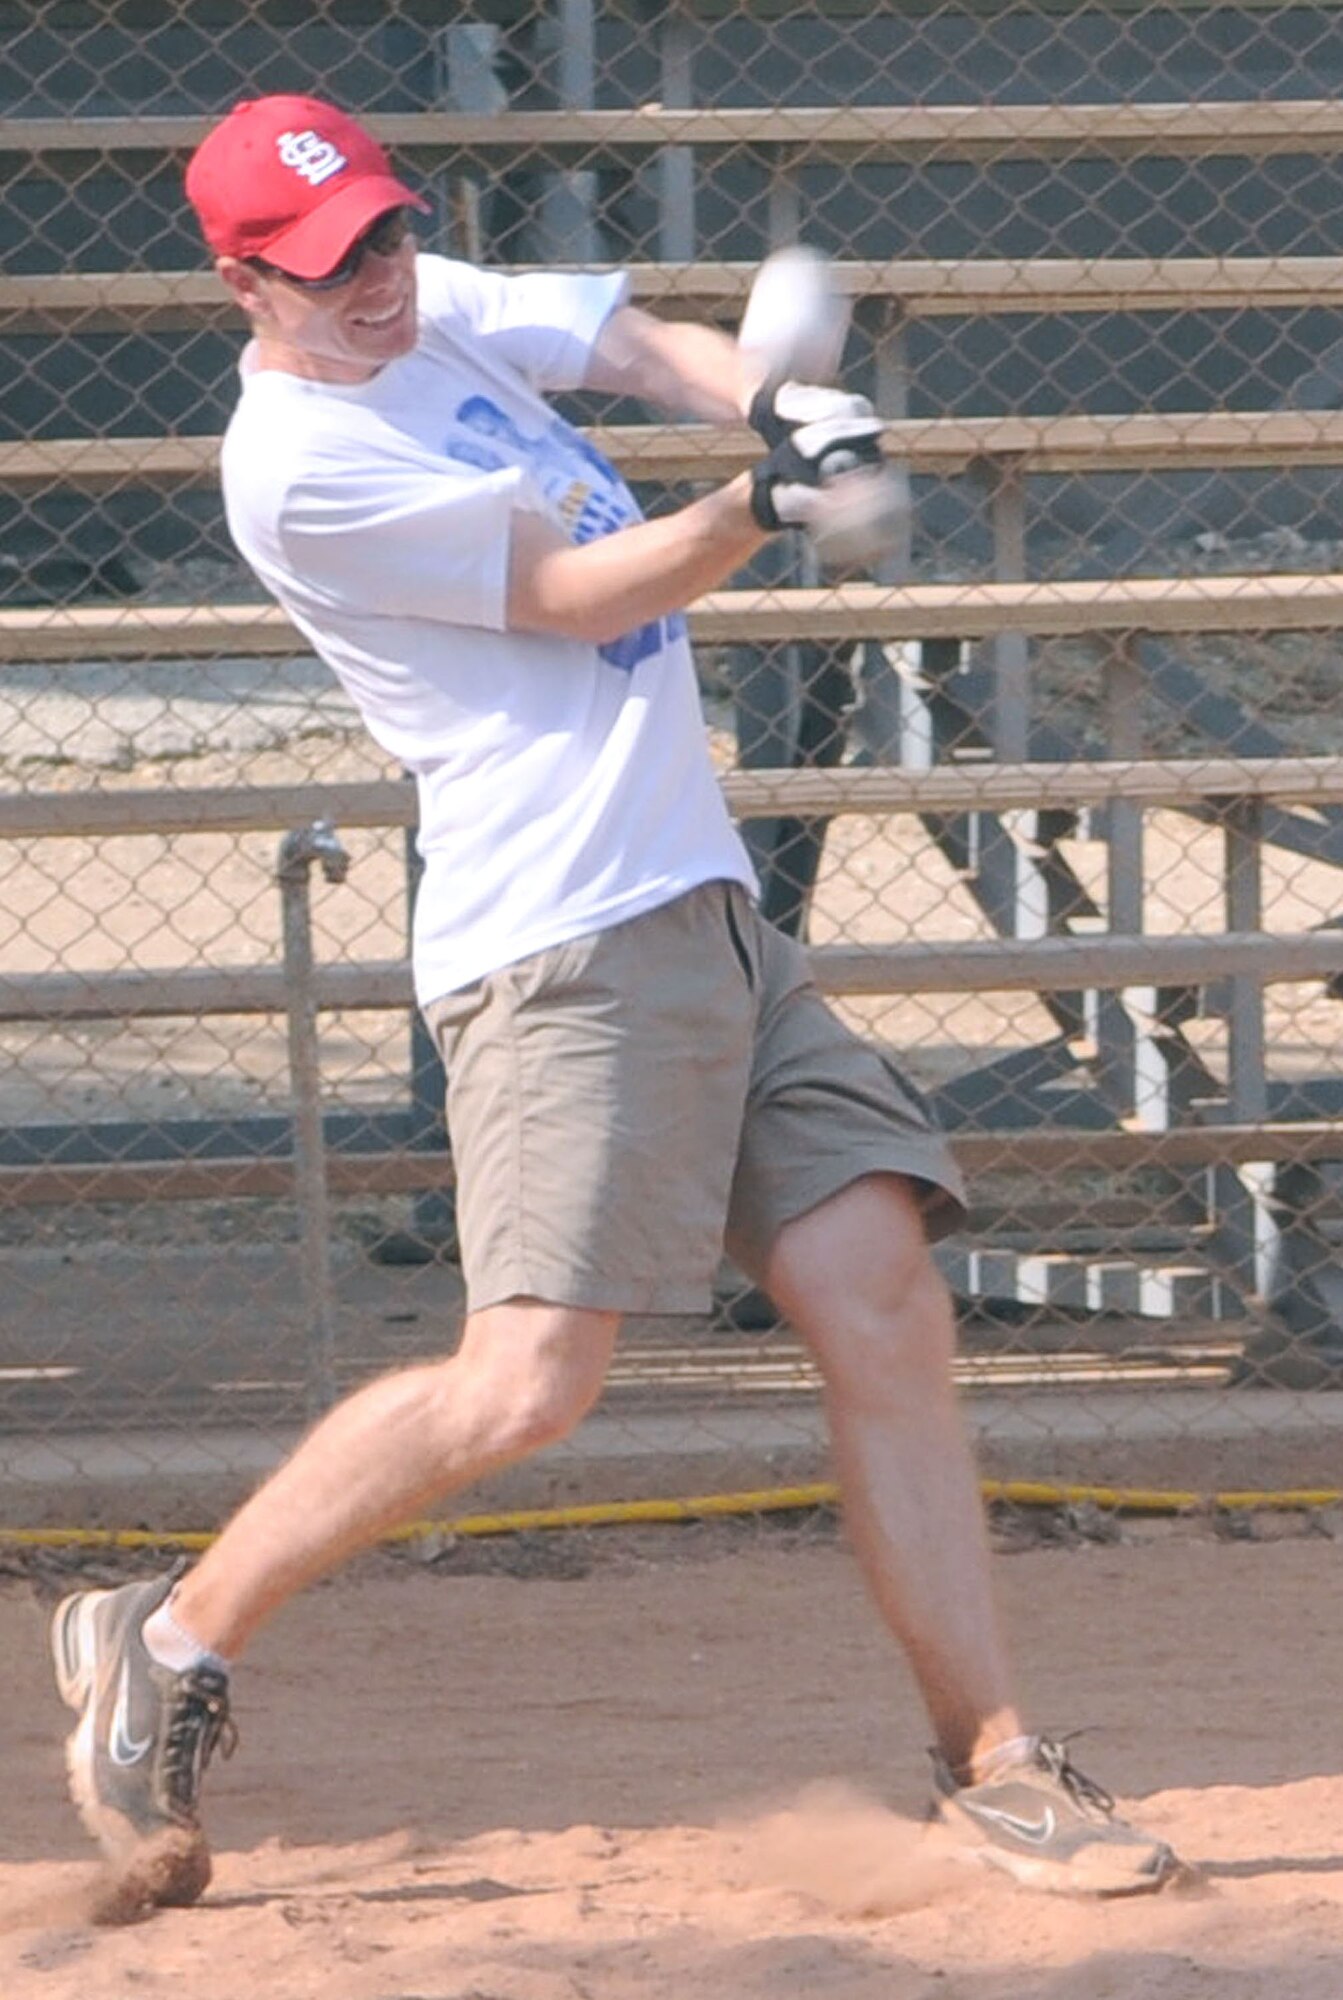 Seth Jenny, the Health and Wellness Center fitness program manager, swings for the fence during the Freedom Fest Home Run Derby Saturday, July 4, 2009 at Incirlik Air Base, Turkey. The winner of the competition was 1st Lt. Jeremy McNatt, 39th Maintenance Squadron, who was awarded an AAFES gift certificate. Freedom Fest was the base’s official Fourth of July celebration and included events such as live bands, concession stands, arts and crafts, a petting zoo and a fireworks show. (U.S. Air Force photo/Senior Airman Alex Martinez)